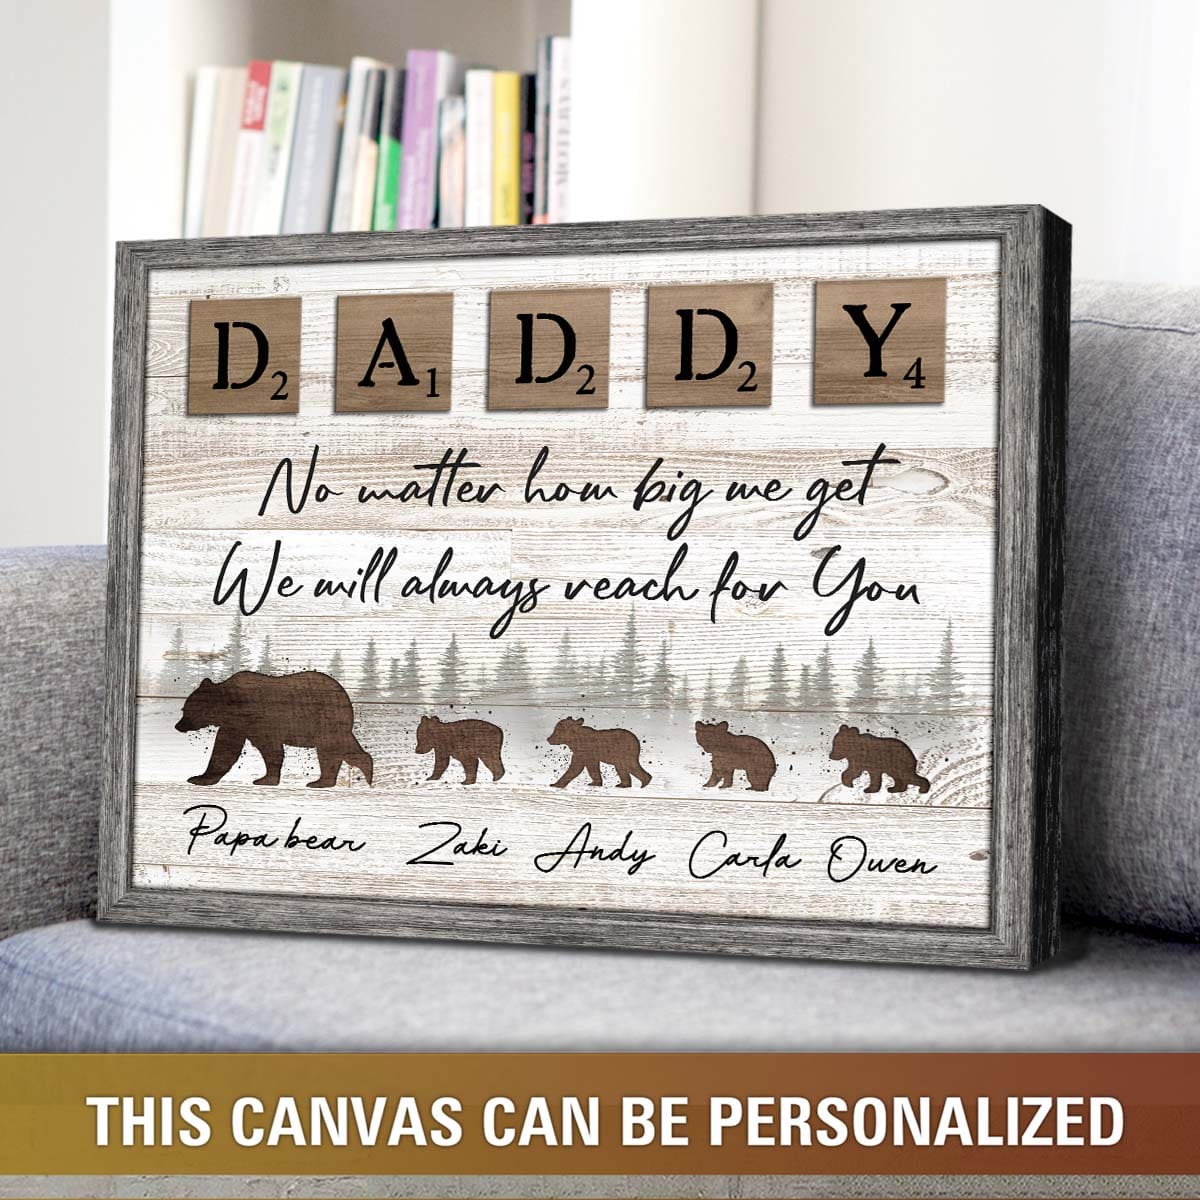 https://images.ohcanvas.com/ohcanvas_com/2022/04/26050752/best-gift-for-fathers-day-personalized-gift-for-dad-papa-bear-canvas-print-1.jpg